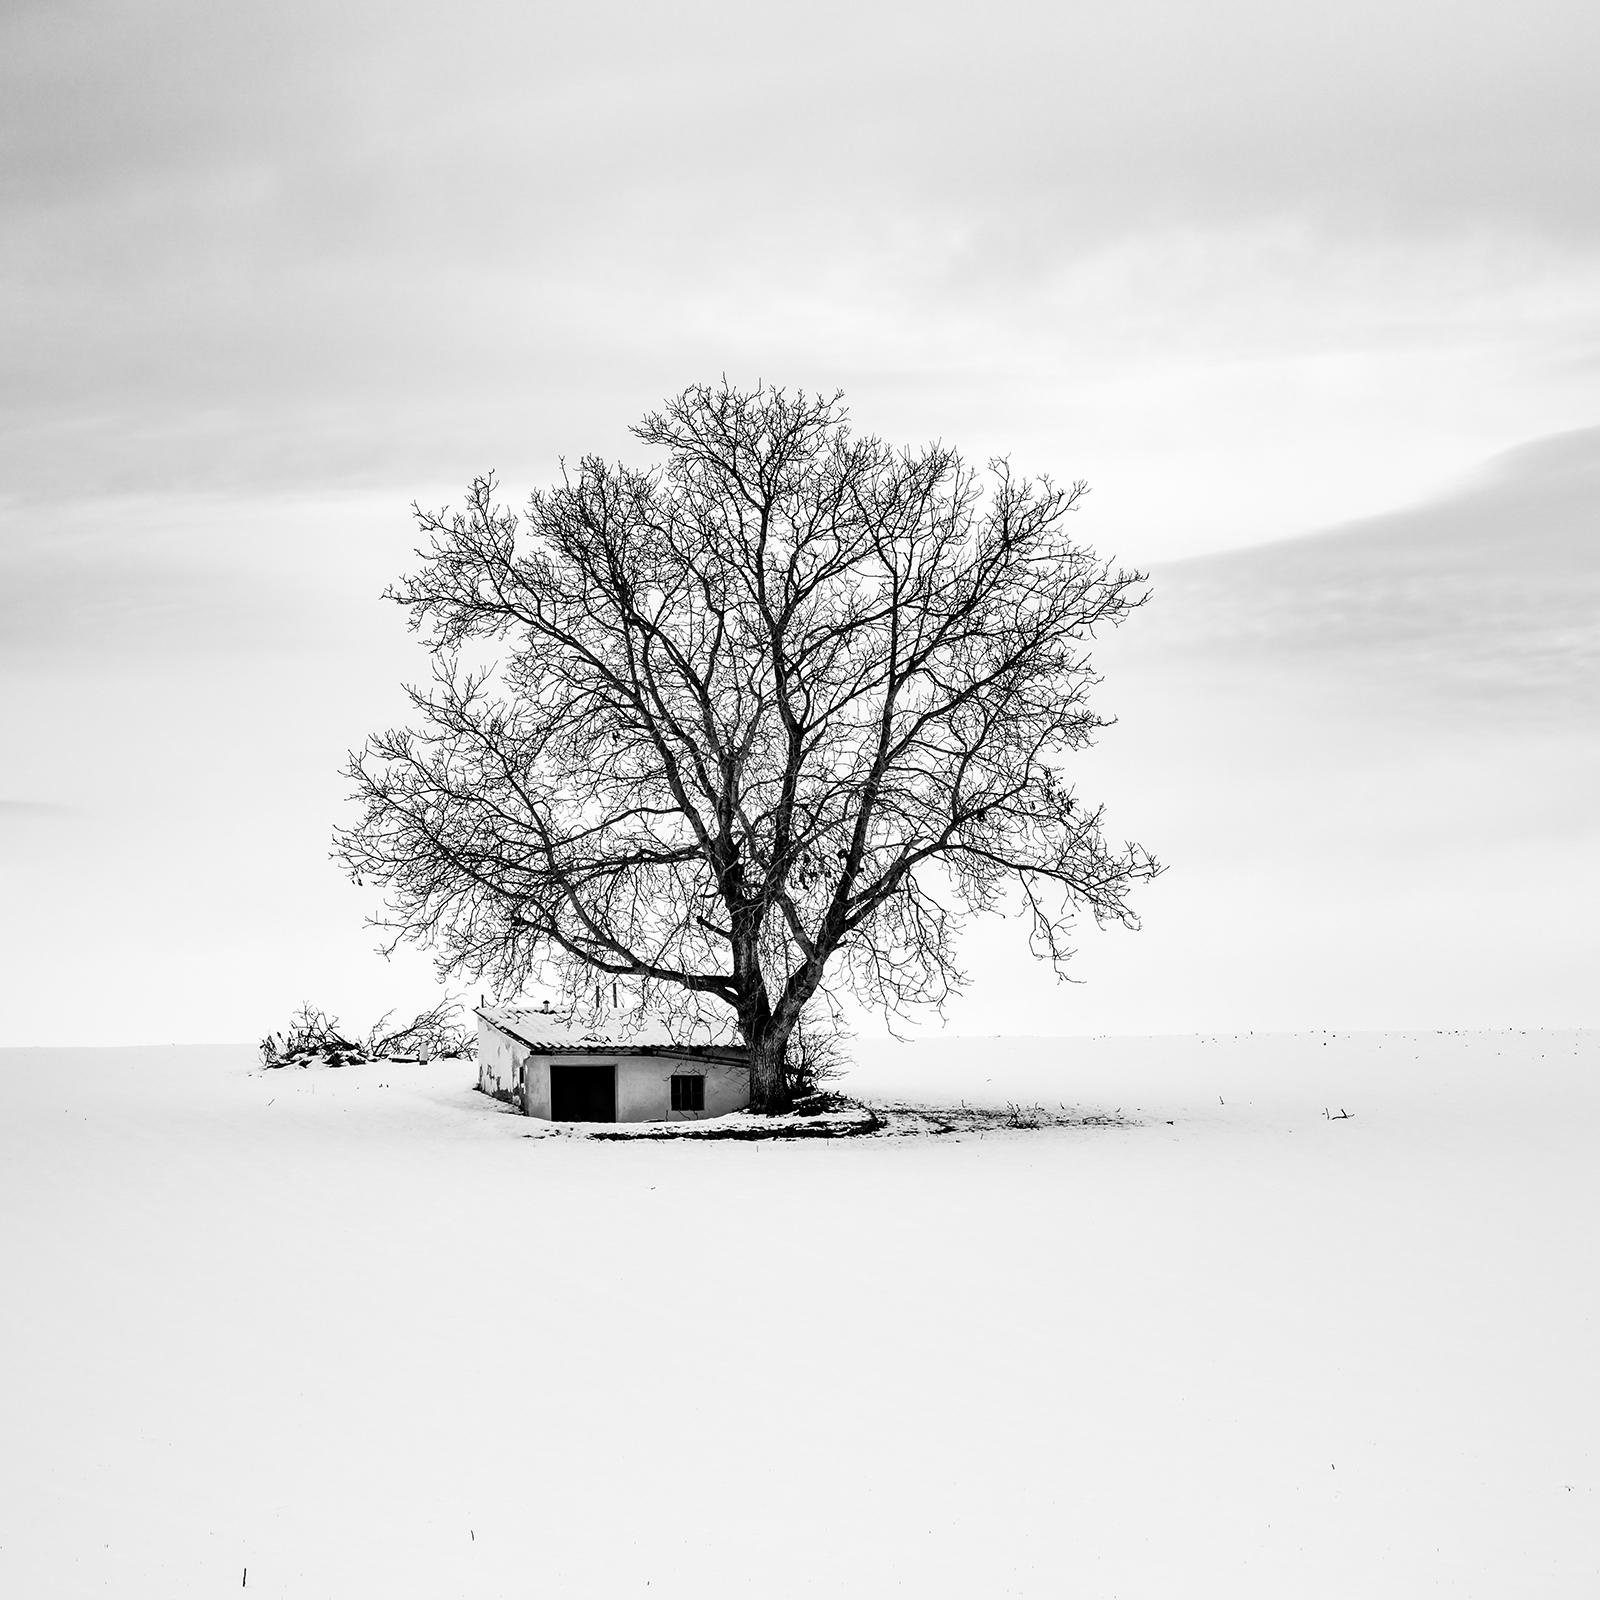 Wine Press House, winter, snow, black and white fine art landscape photography For Sale 3